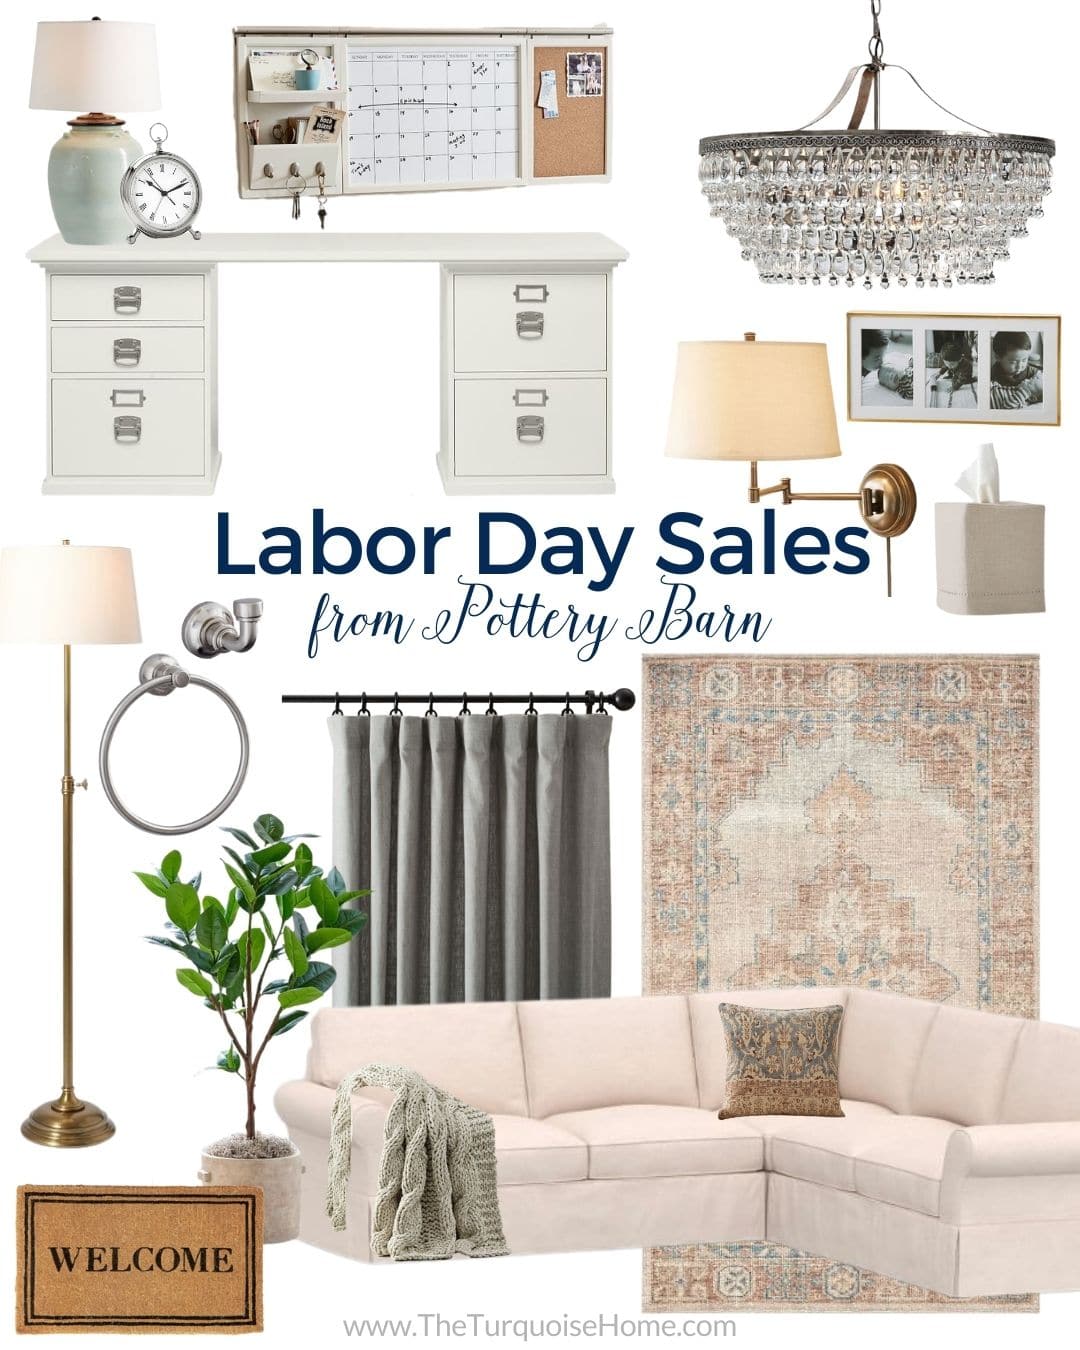 Labor Day Sales from Pottery Barn